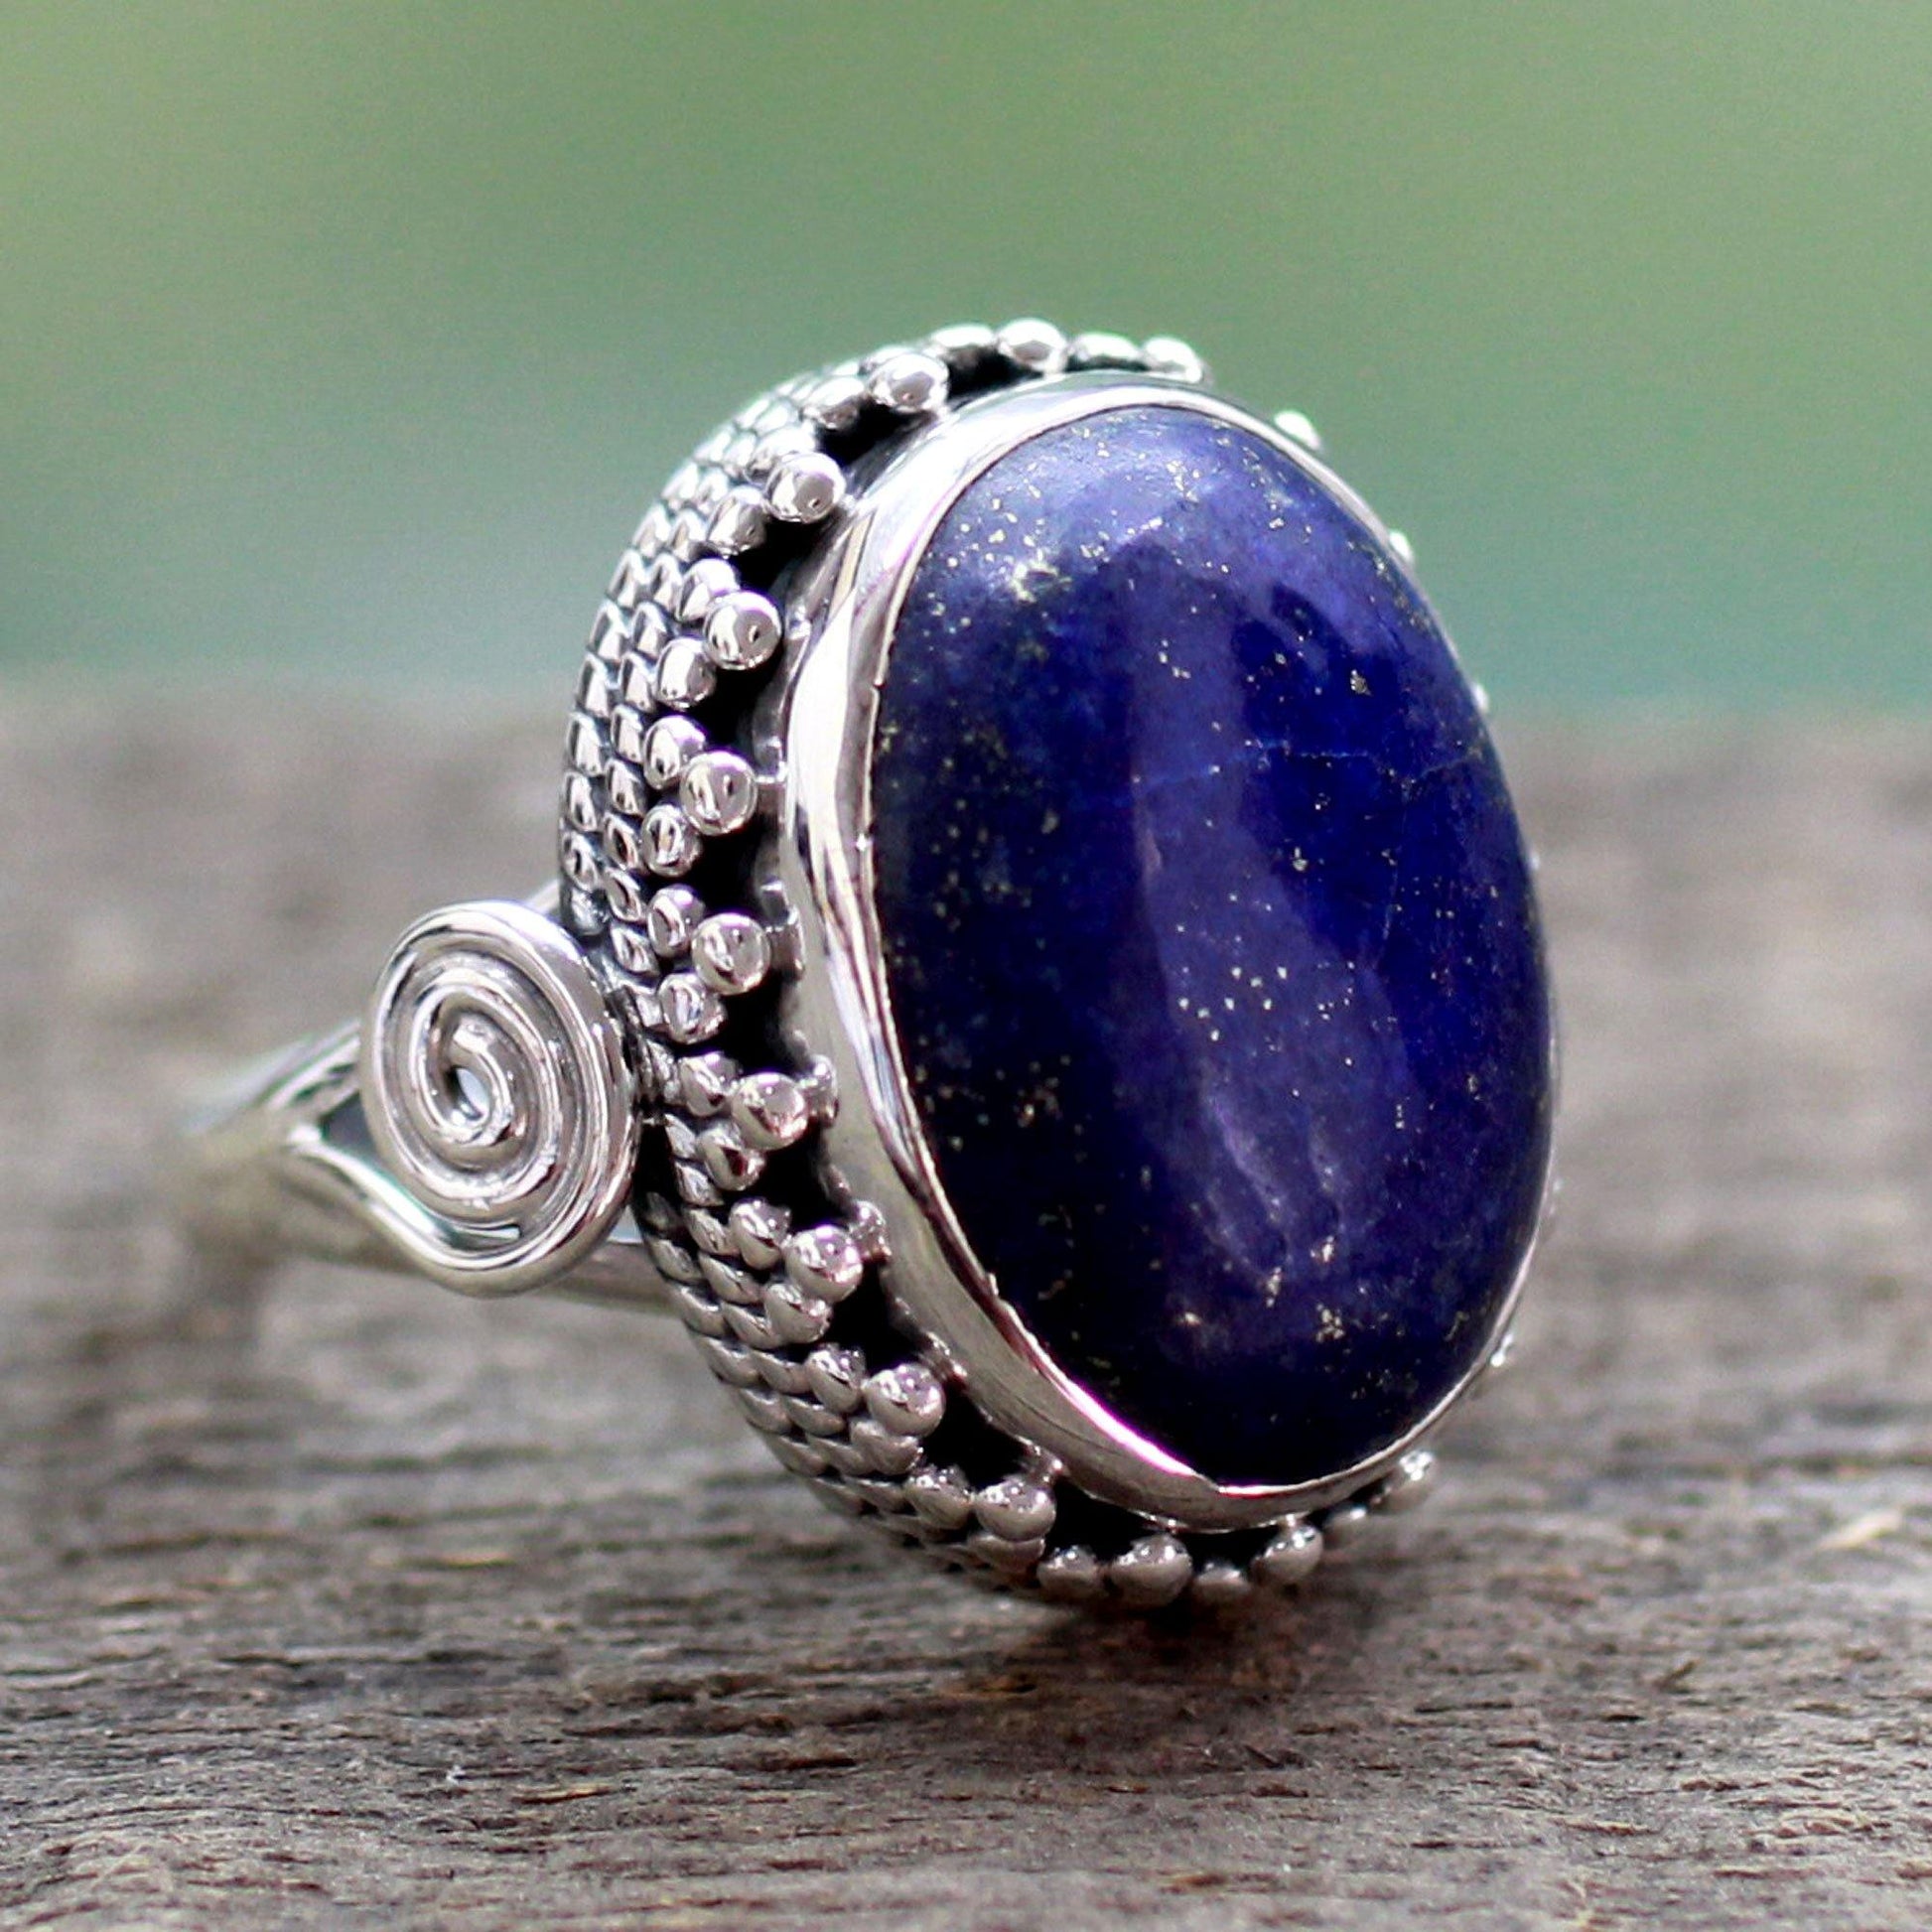 NOVICA - Handcrafted Lapis Lazuli & Sterling Silver Cocktail Ring